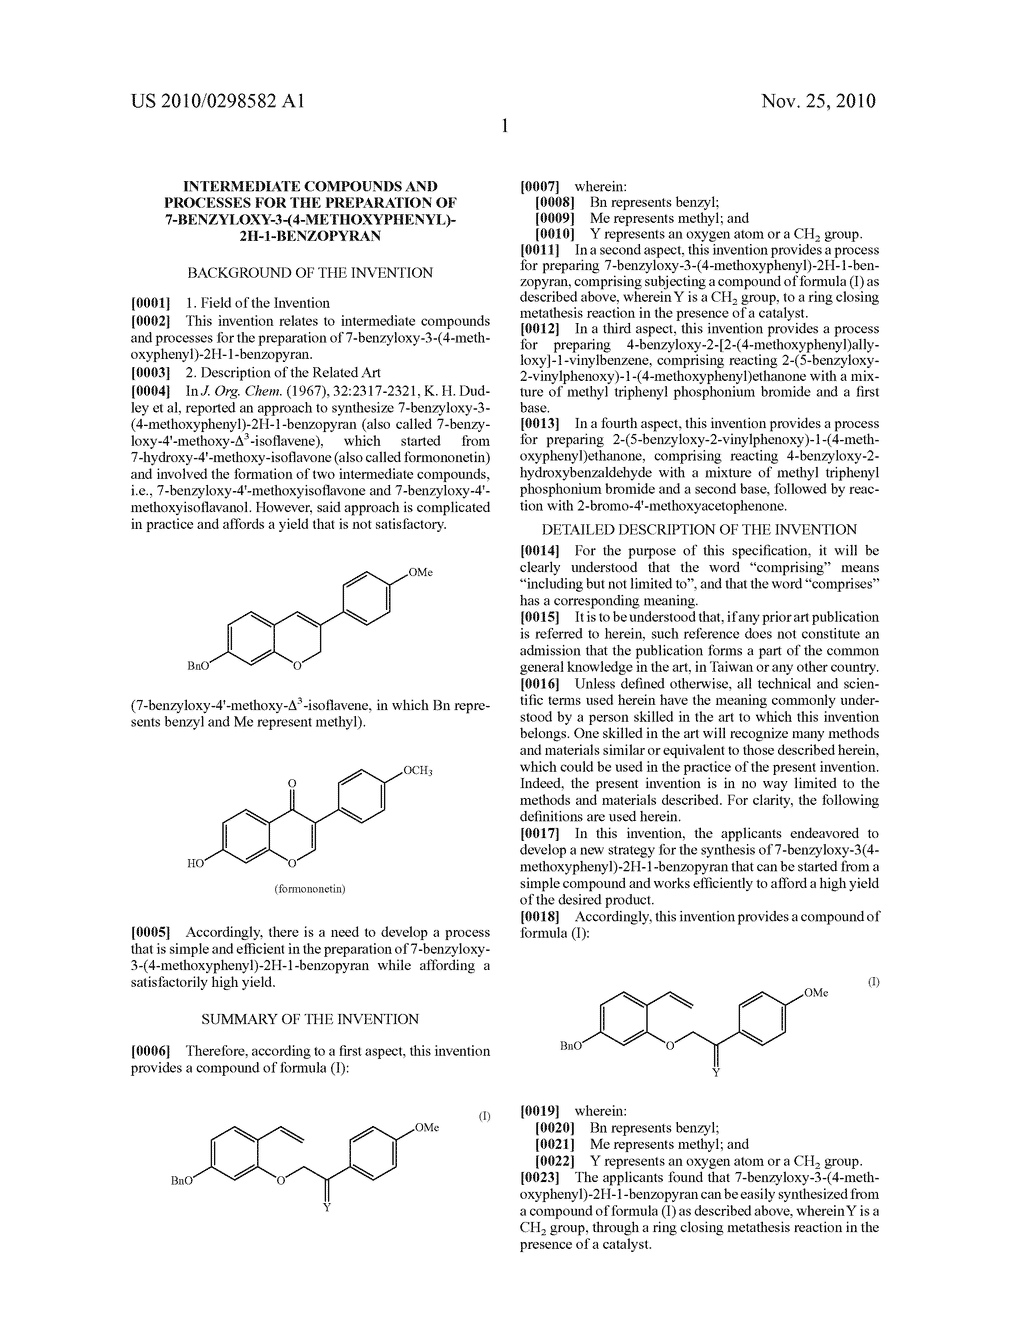 Intermediate Compounds and Processes for the Preparation of 7-benzyloxy-3-(4-methoxyphenyl)-2H-1-benzopyran - diagram, schematic, and image 02